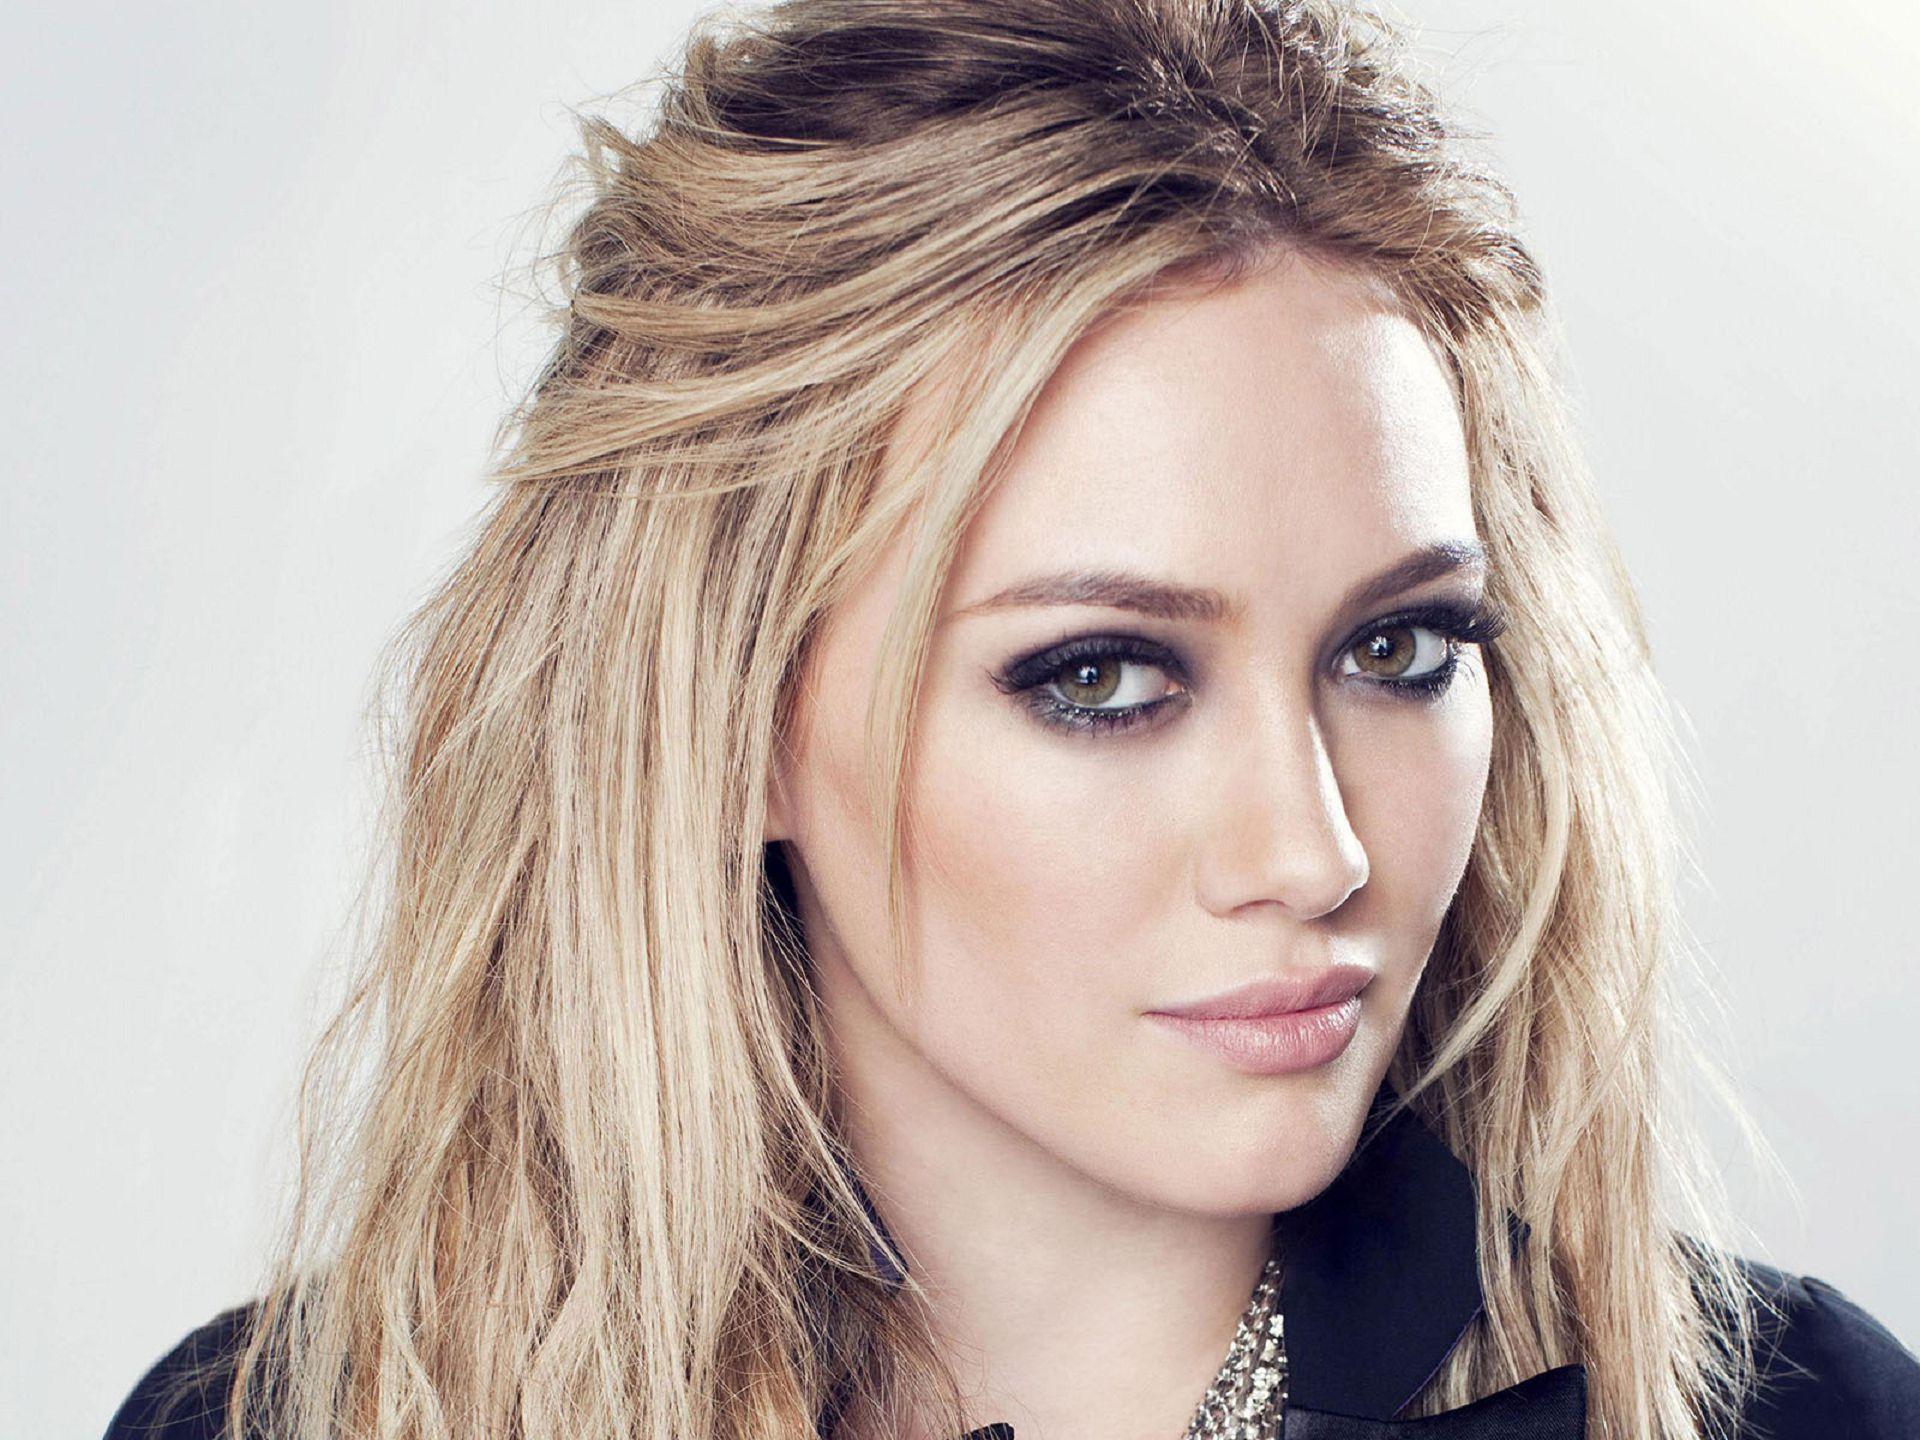 Hilary Duff Wallpaper Image Photo Picture Background